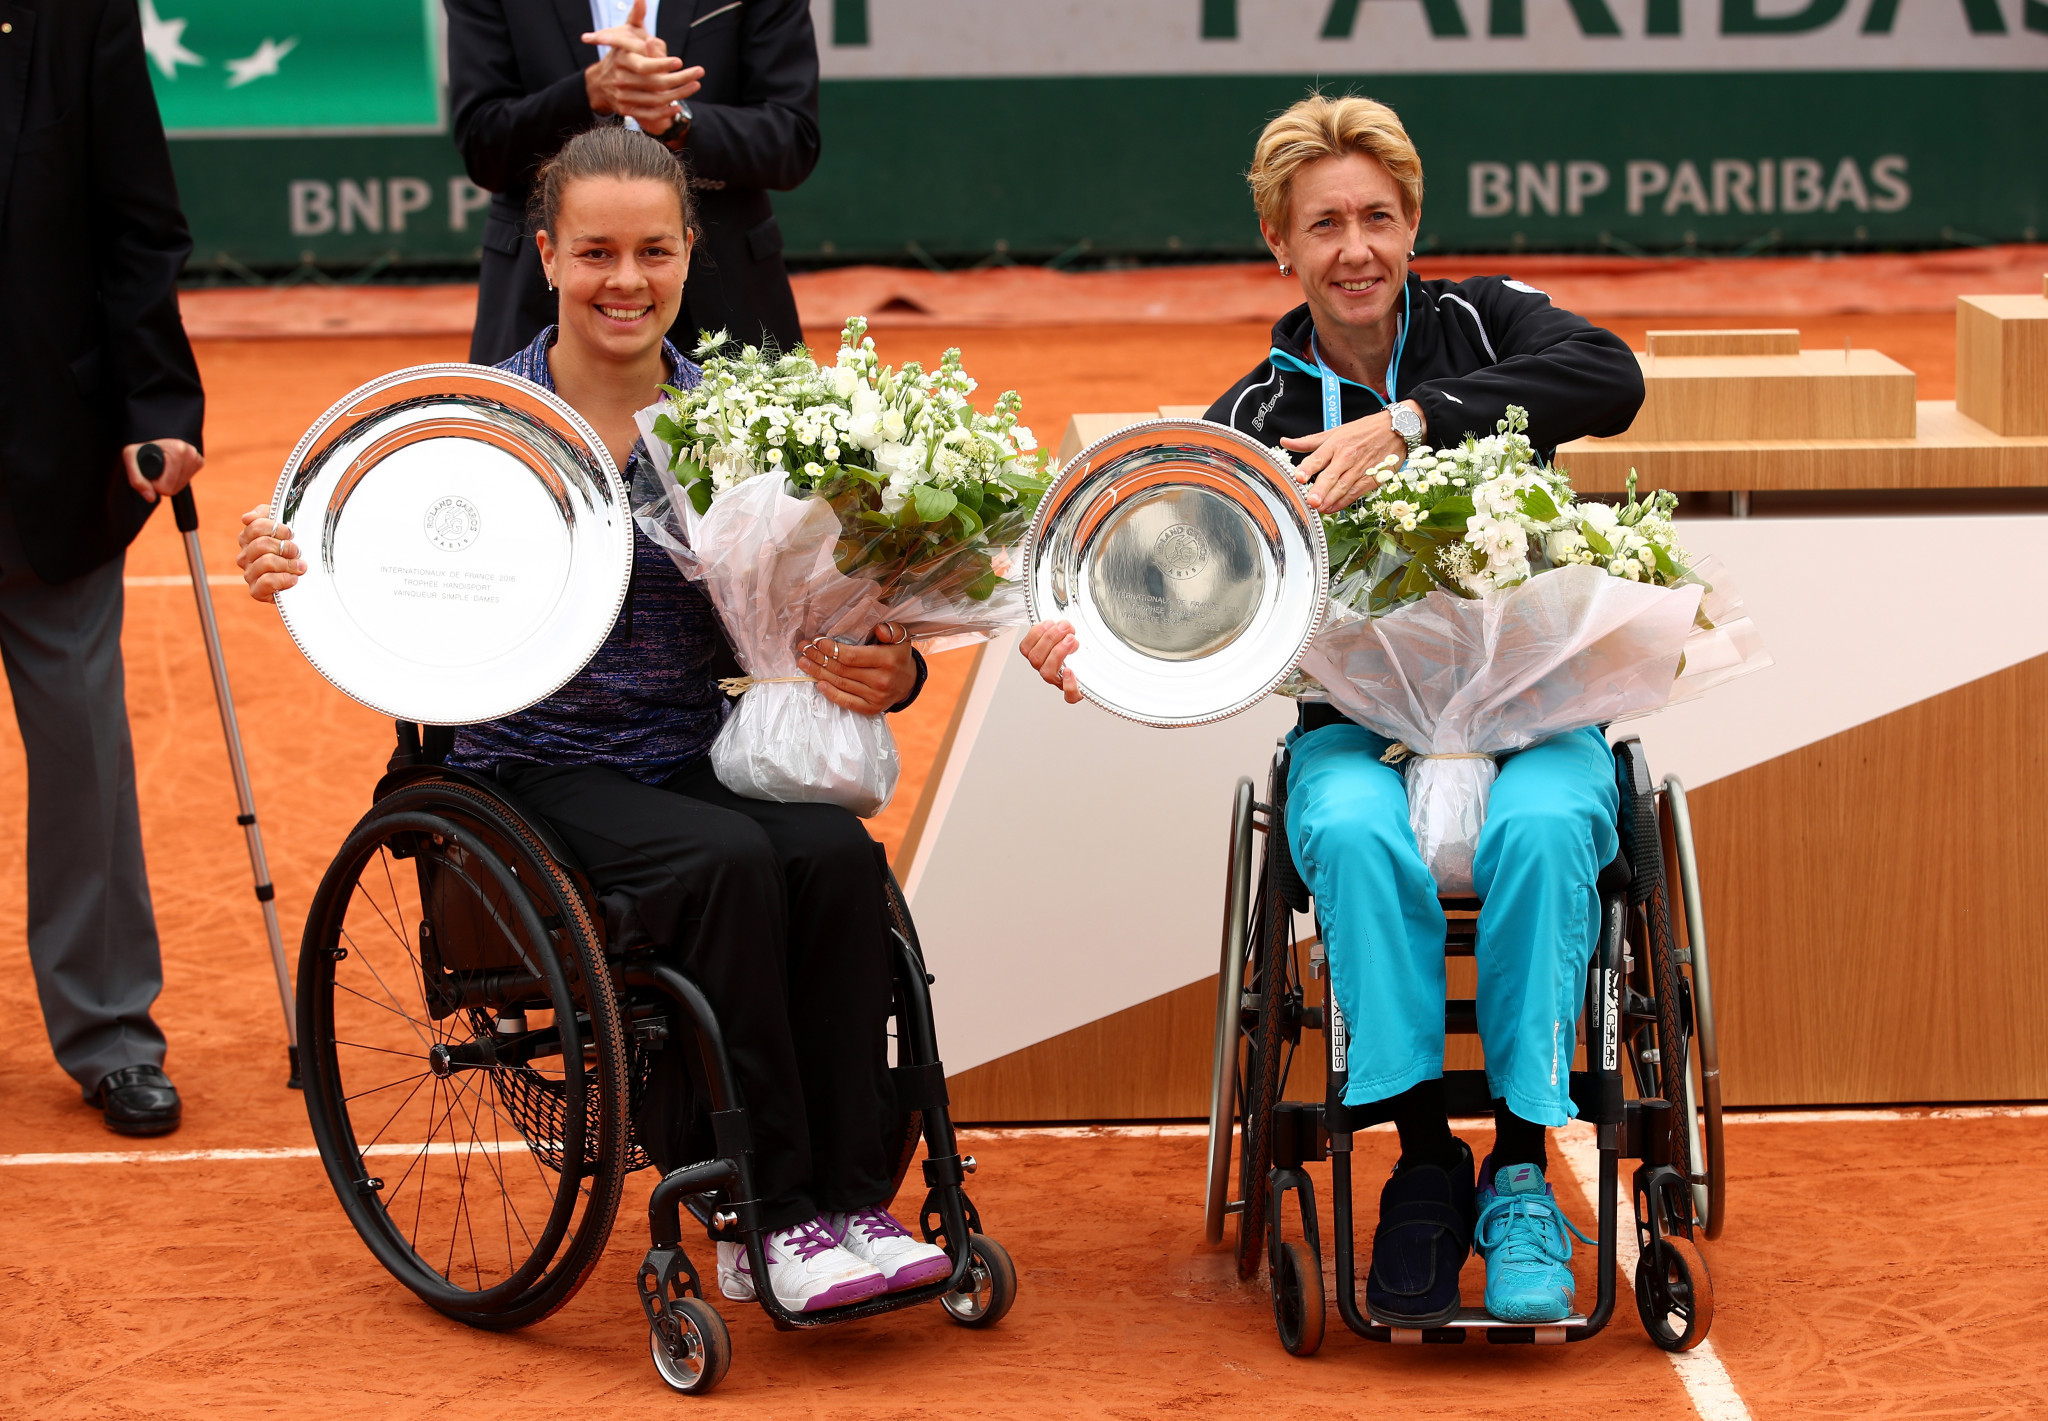 Marjolein Buis, left, won her only major singles title at the French Open in 2016, beating Sabine Ellerbrock of Germany in the final ©Getty Images